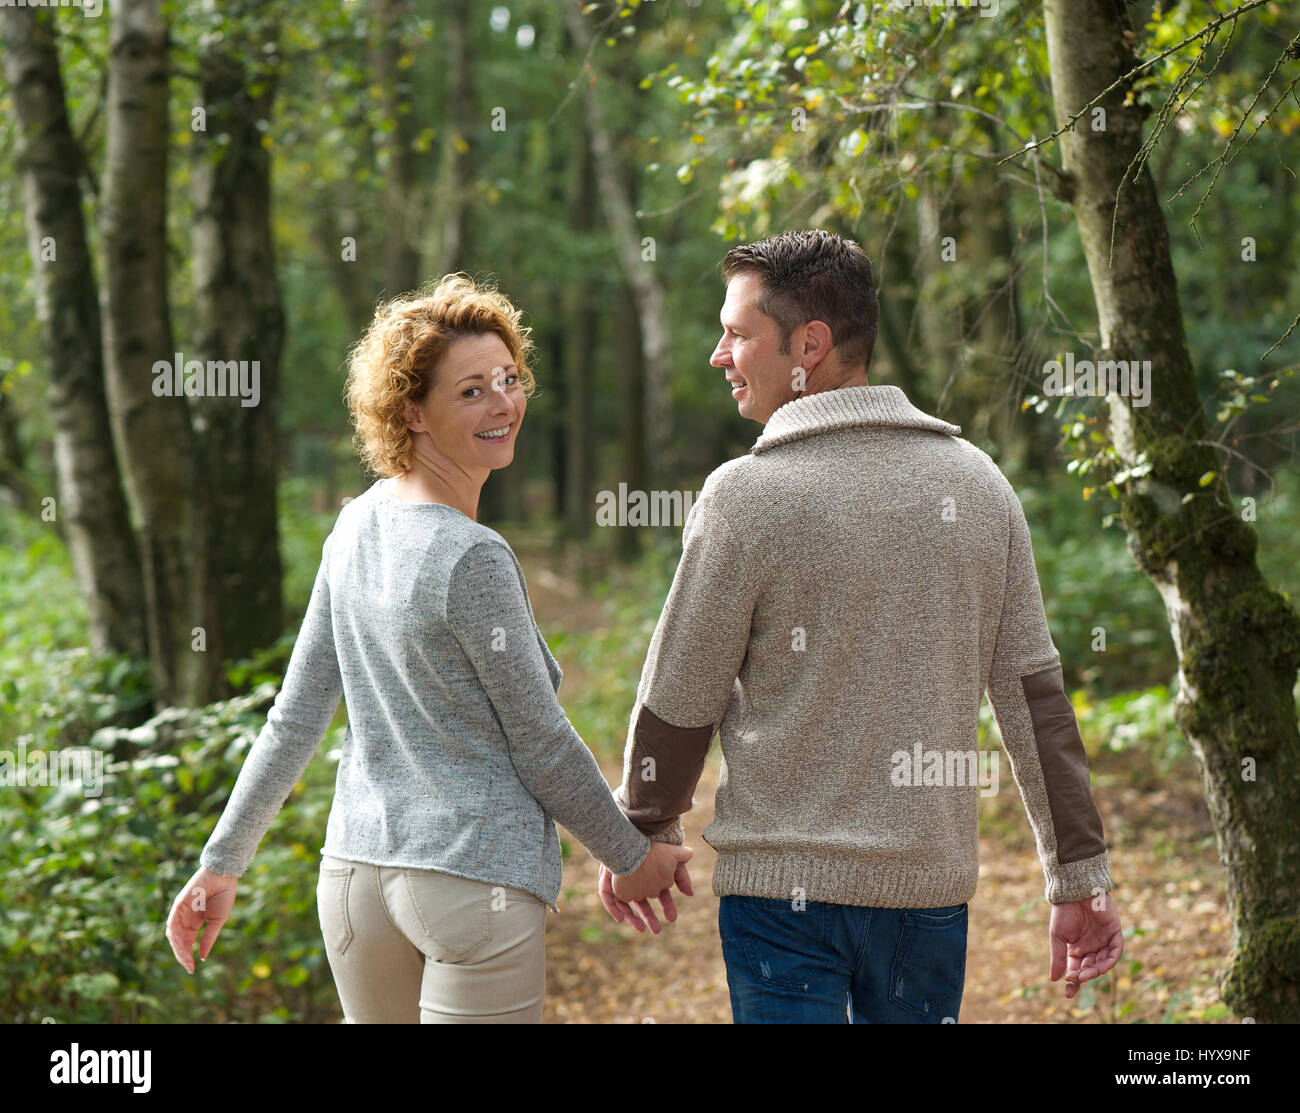 Portrait of a happy couple holding hands and walking in the forest Stock Photo